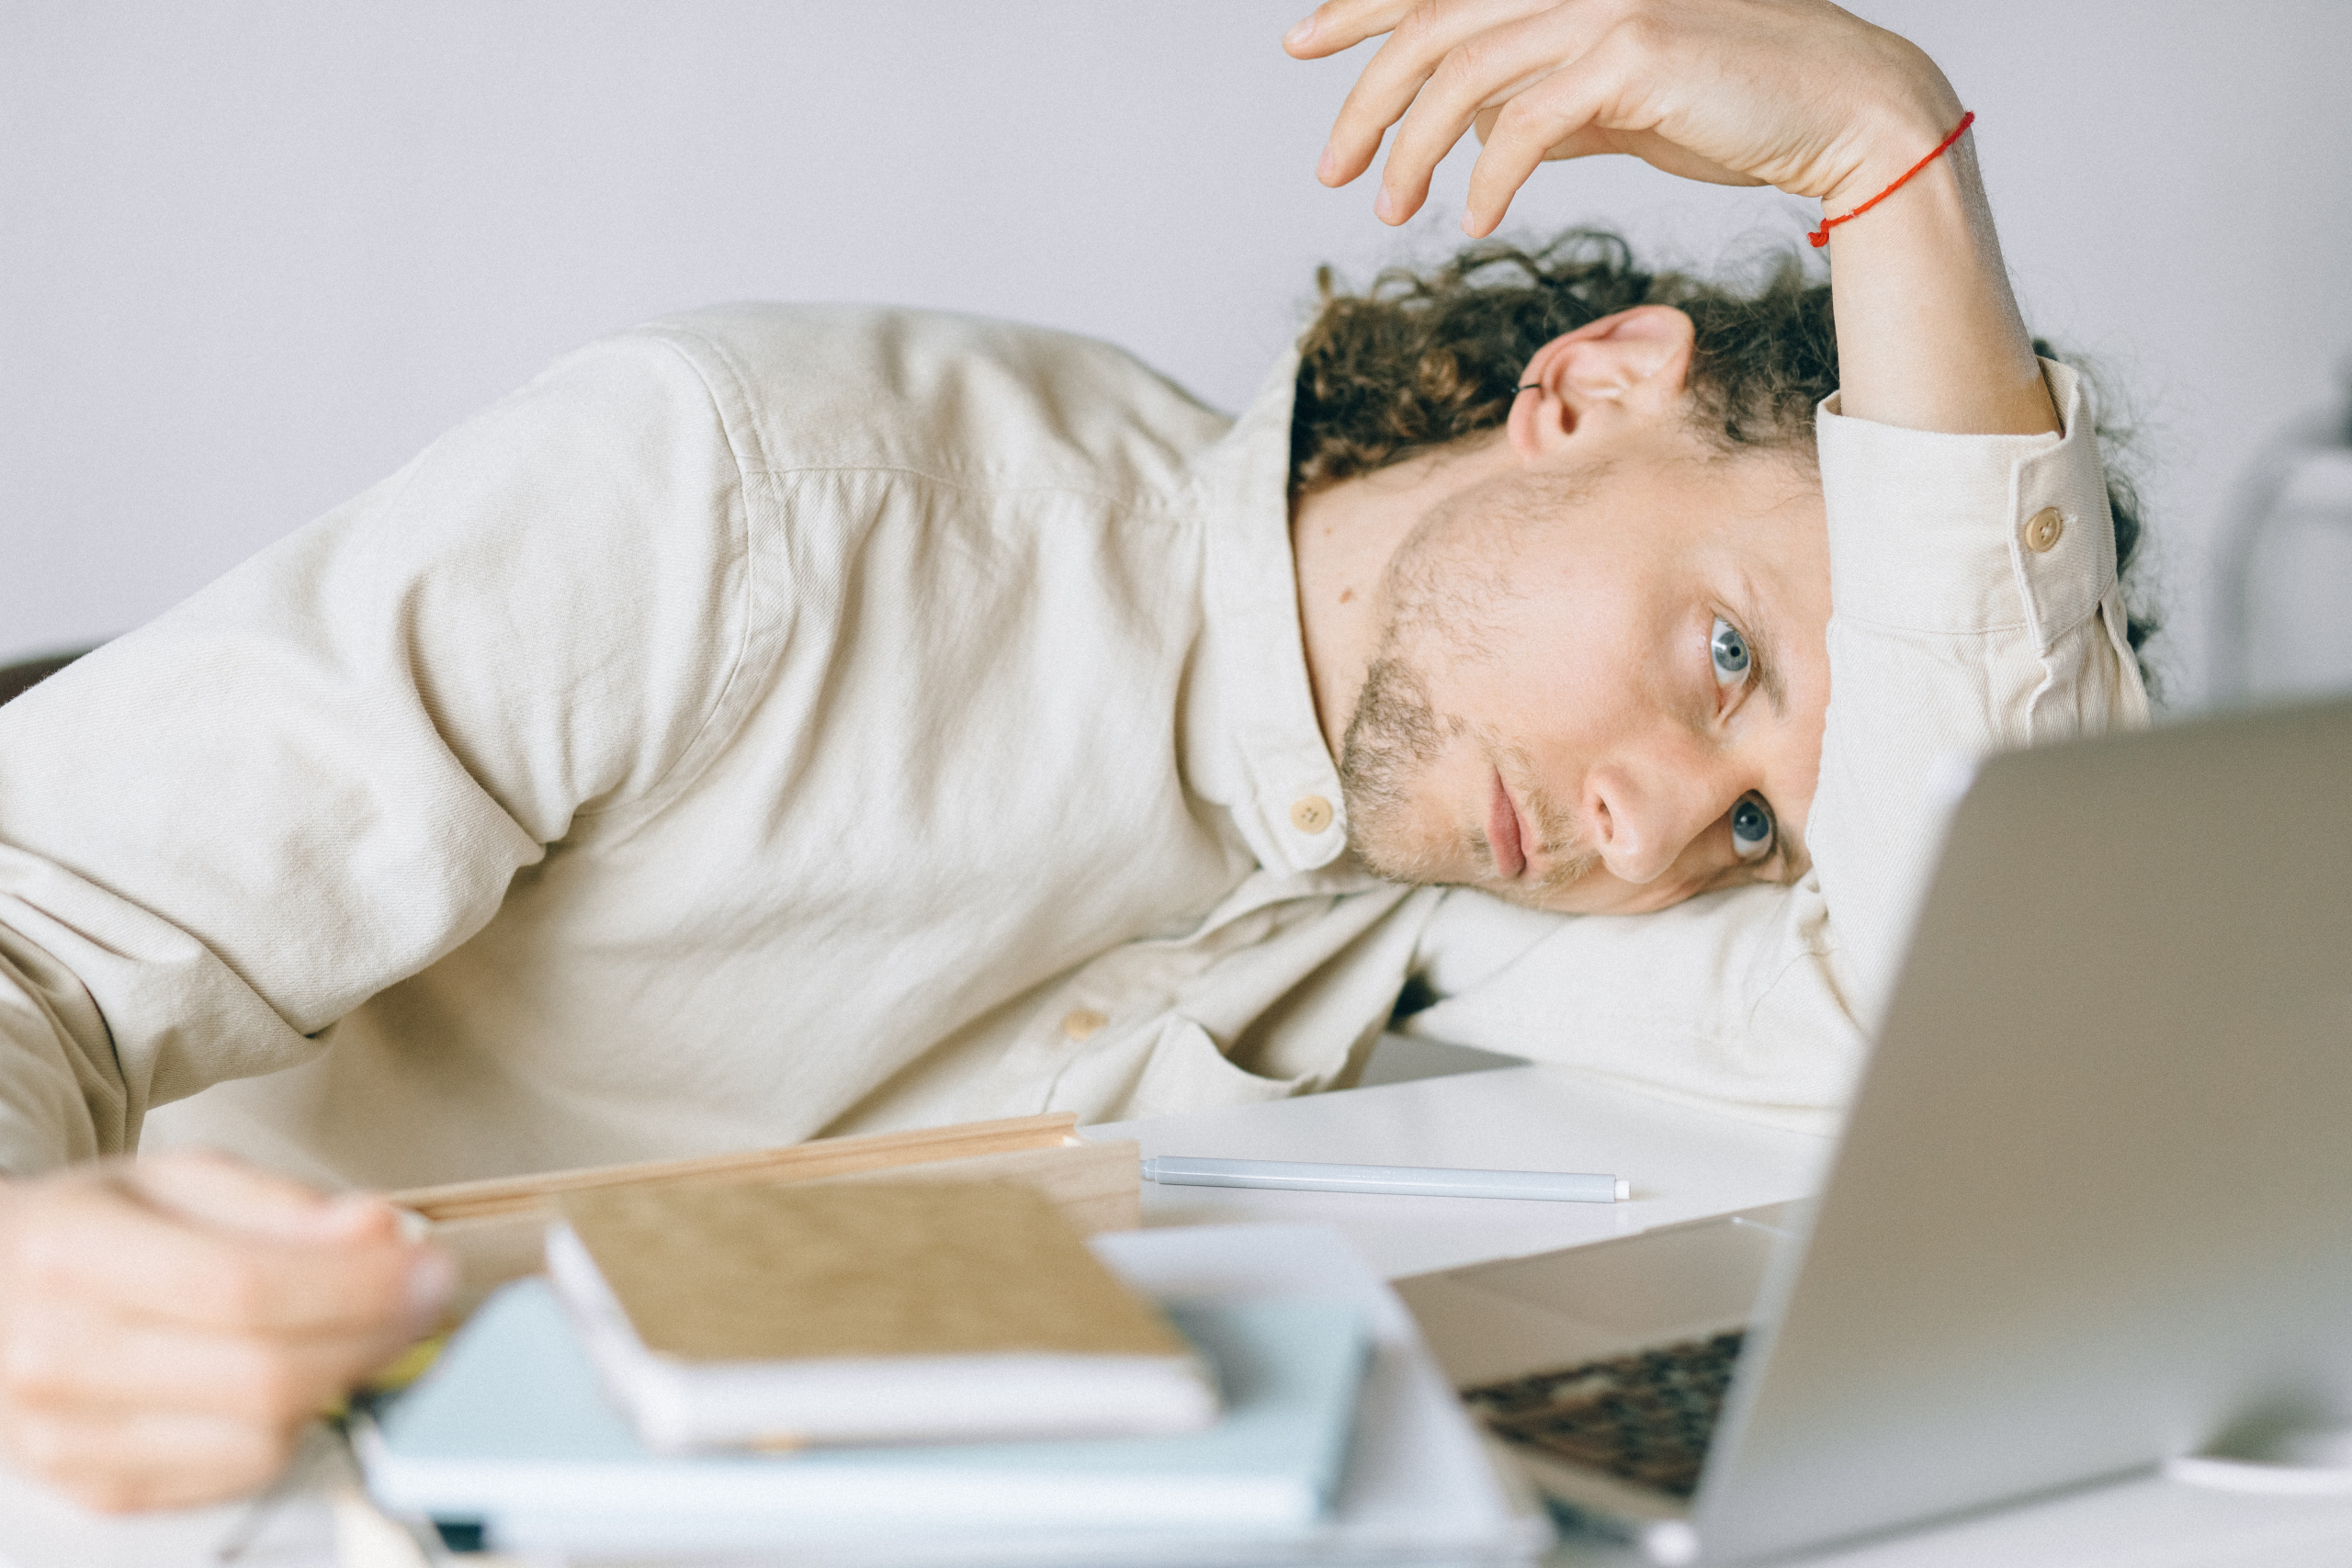 Overworked employee lying in front of laptop, appearing exhausted and needs to overcome burnout.